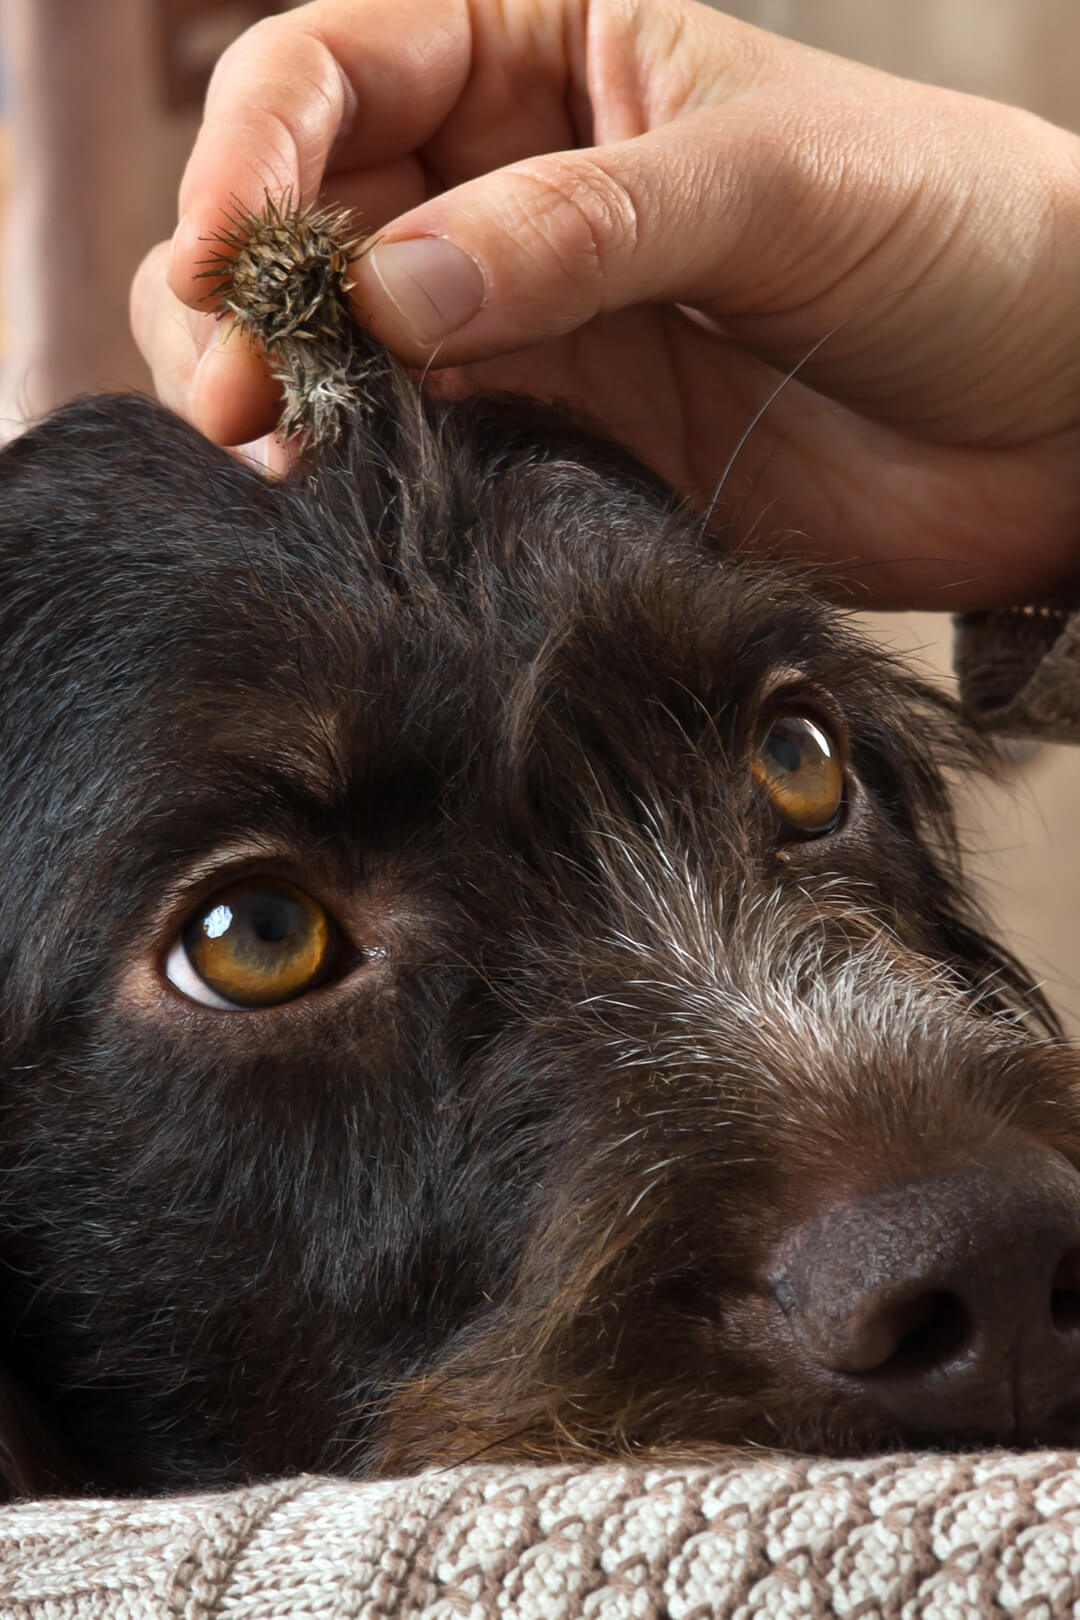 How To Spot And Remove Foxtails From Your Dog